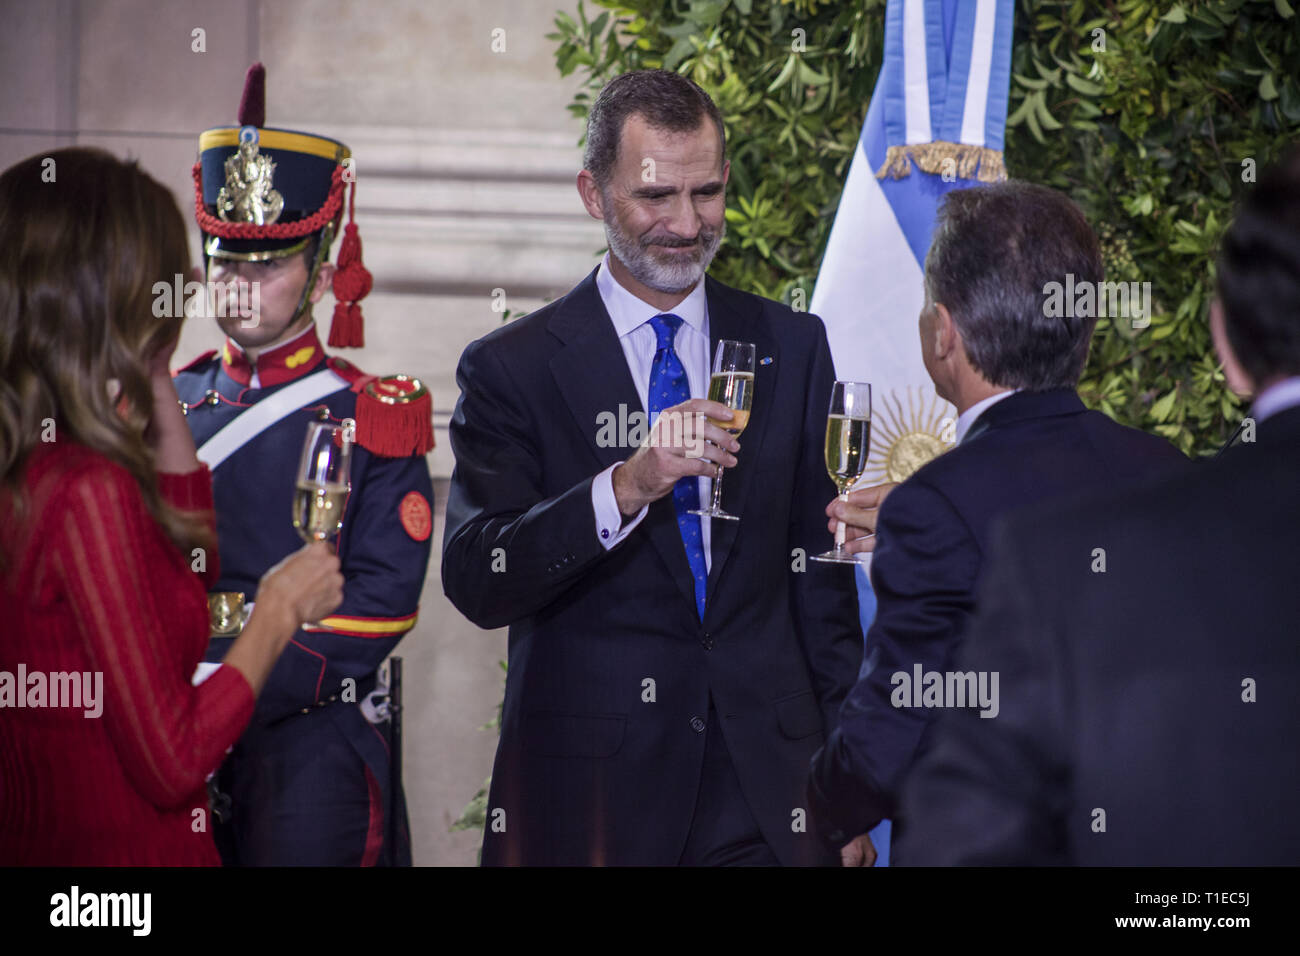 Buenos Aires, Federal Capital, Argentina. 25th Mar, 2019. The kings of Spain, Felipe VI and Letizia Ortiz, arrived on Sunday night, March 24, in Buenos Aires as part of the State visit to Argentina.According to the predicted, the official activities of the monarchs began this Monday, March 25, with a bulky agenda of activities.In the morning they met at Casa Rosada with President Mauricio Macri and the First Lady, Juliana Awada.The kings arrived at the government headquarters around 11 in the morning and after taking the official photo in the White Room, Macri and Felipe VI gave a message Stock Photo